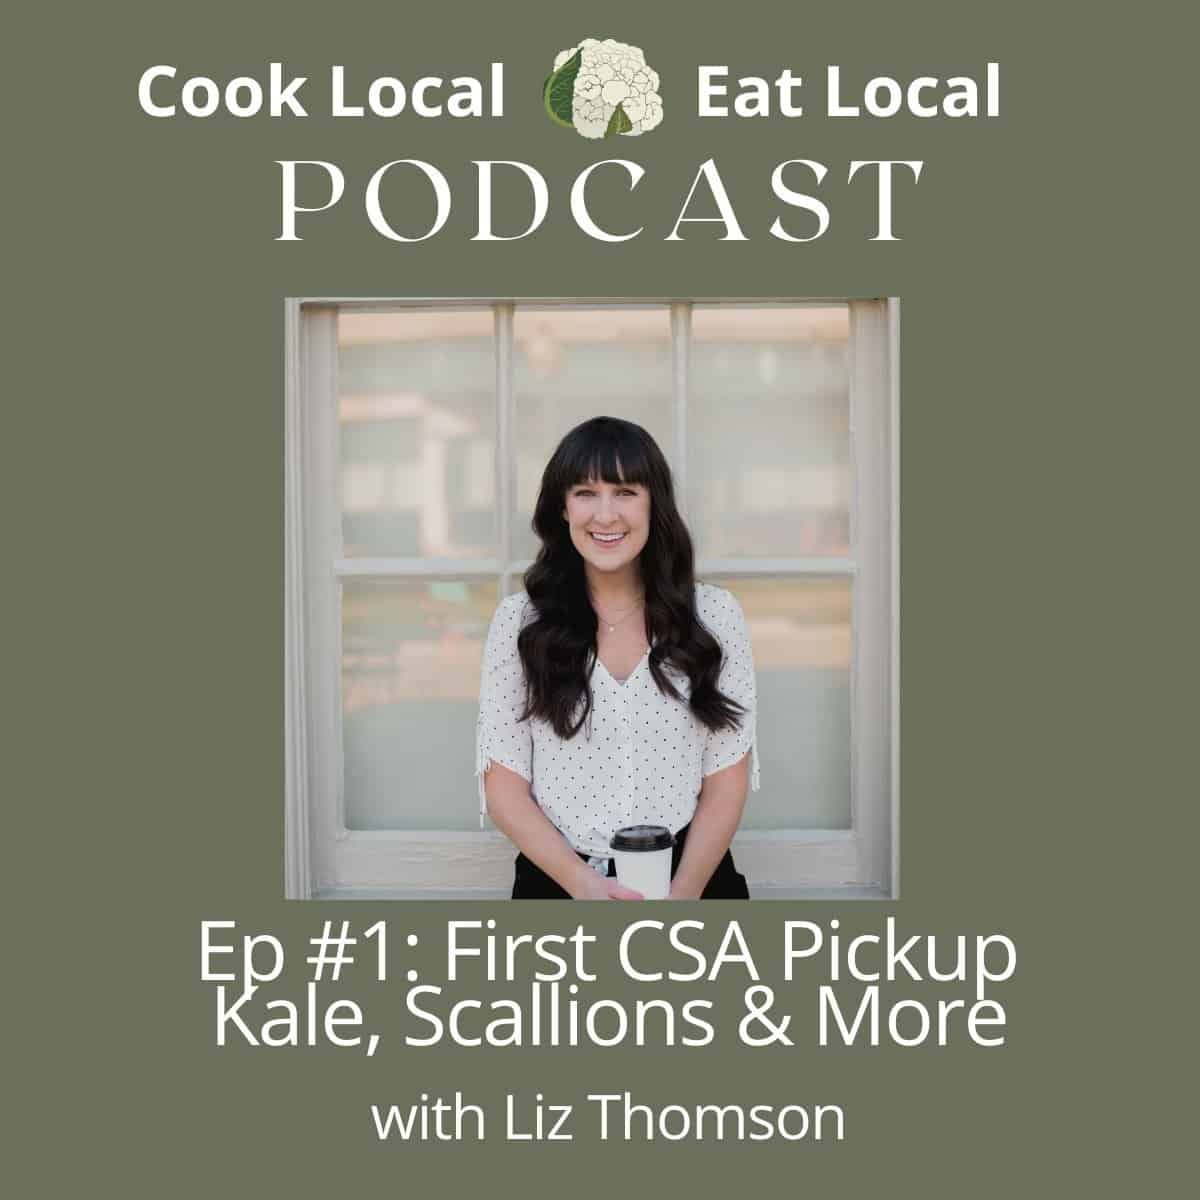 podcast cover image with a photo of Liz Thomson and text that says Episode 1: First CSA Pickup Kale, Scallions and more.